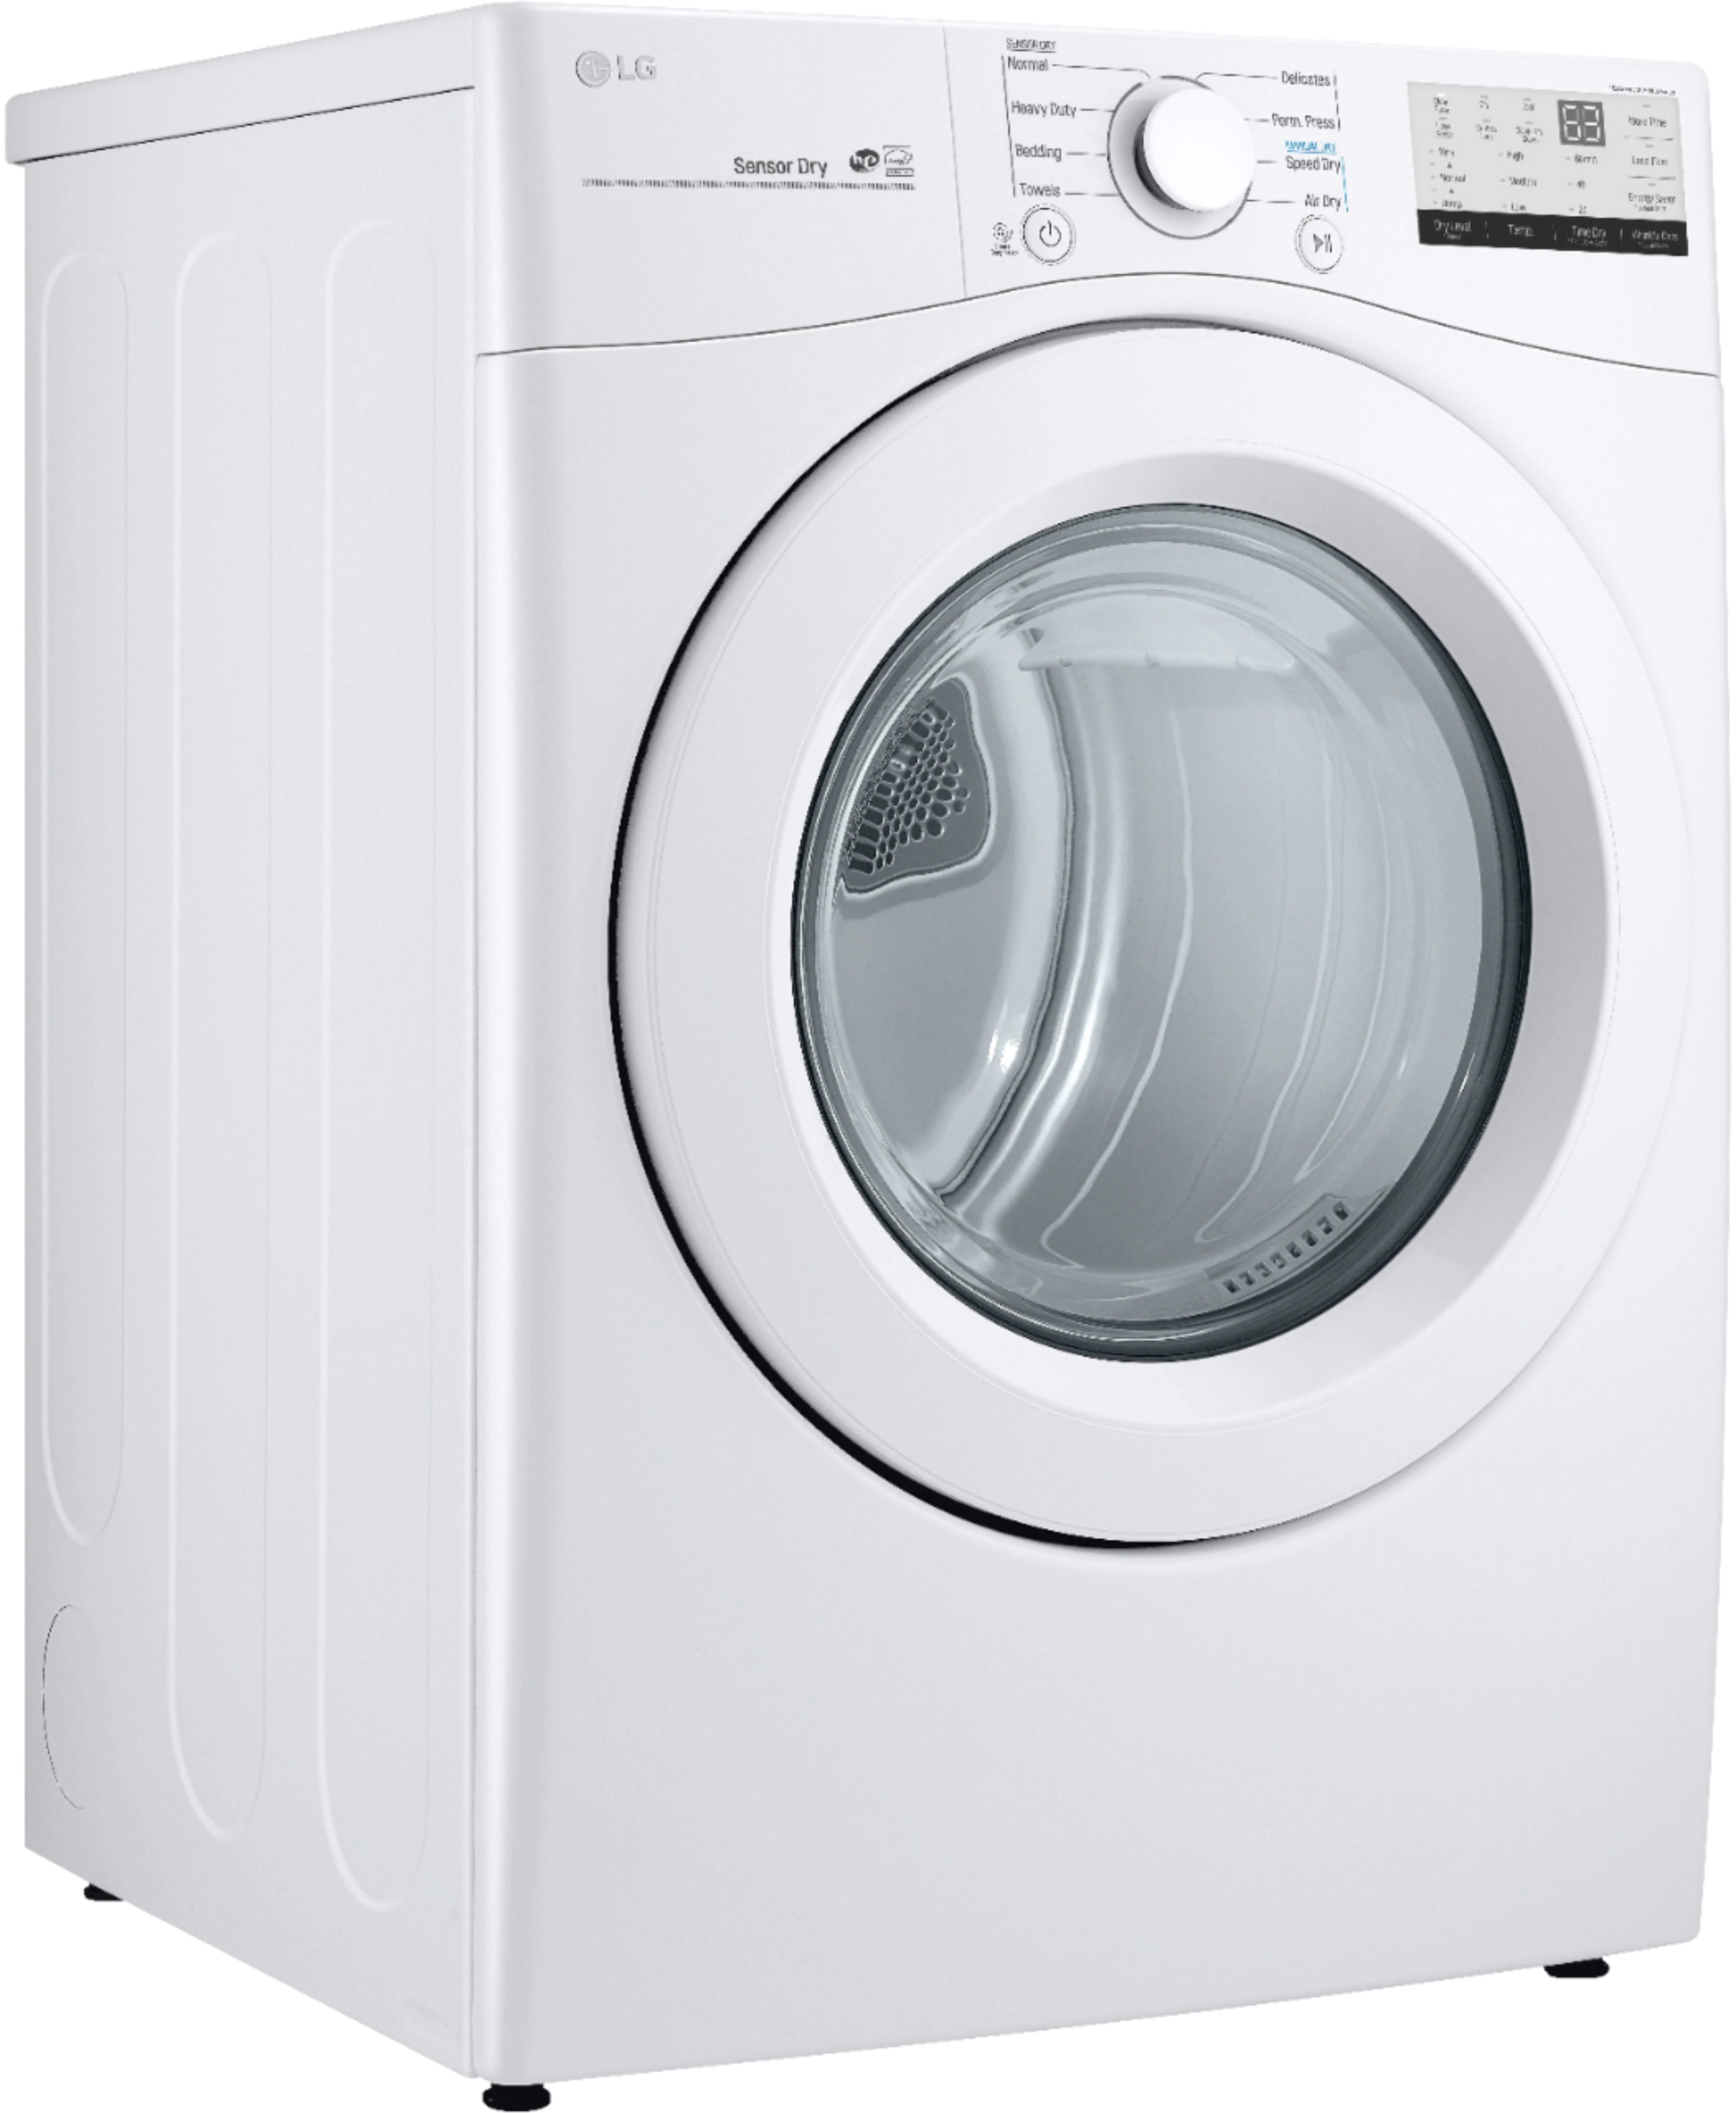 7.4 Cu. Ft. Stackable Gas Dryer with FlowSense? - White